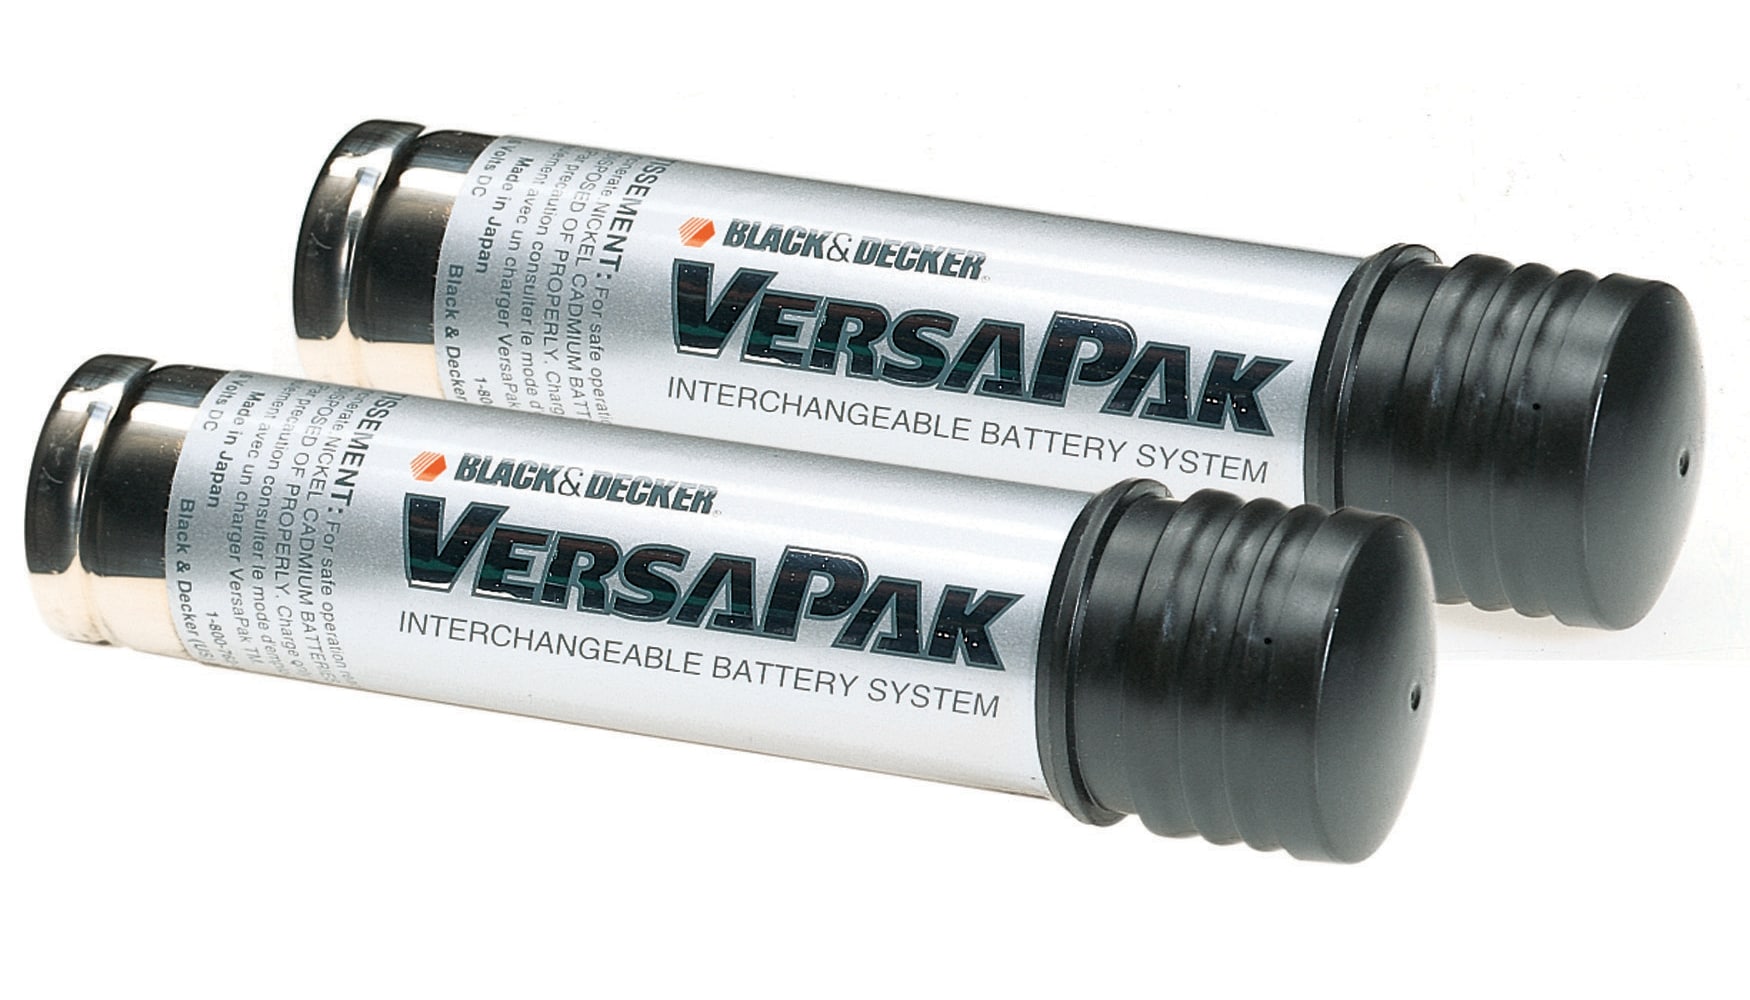 How Long Does it Take to Recharge a Black & Decker 3.6 Volt VersaPak Battery?